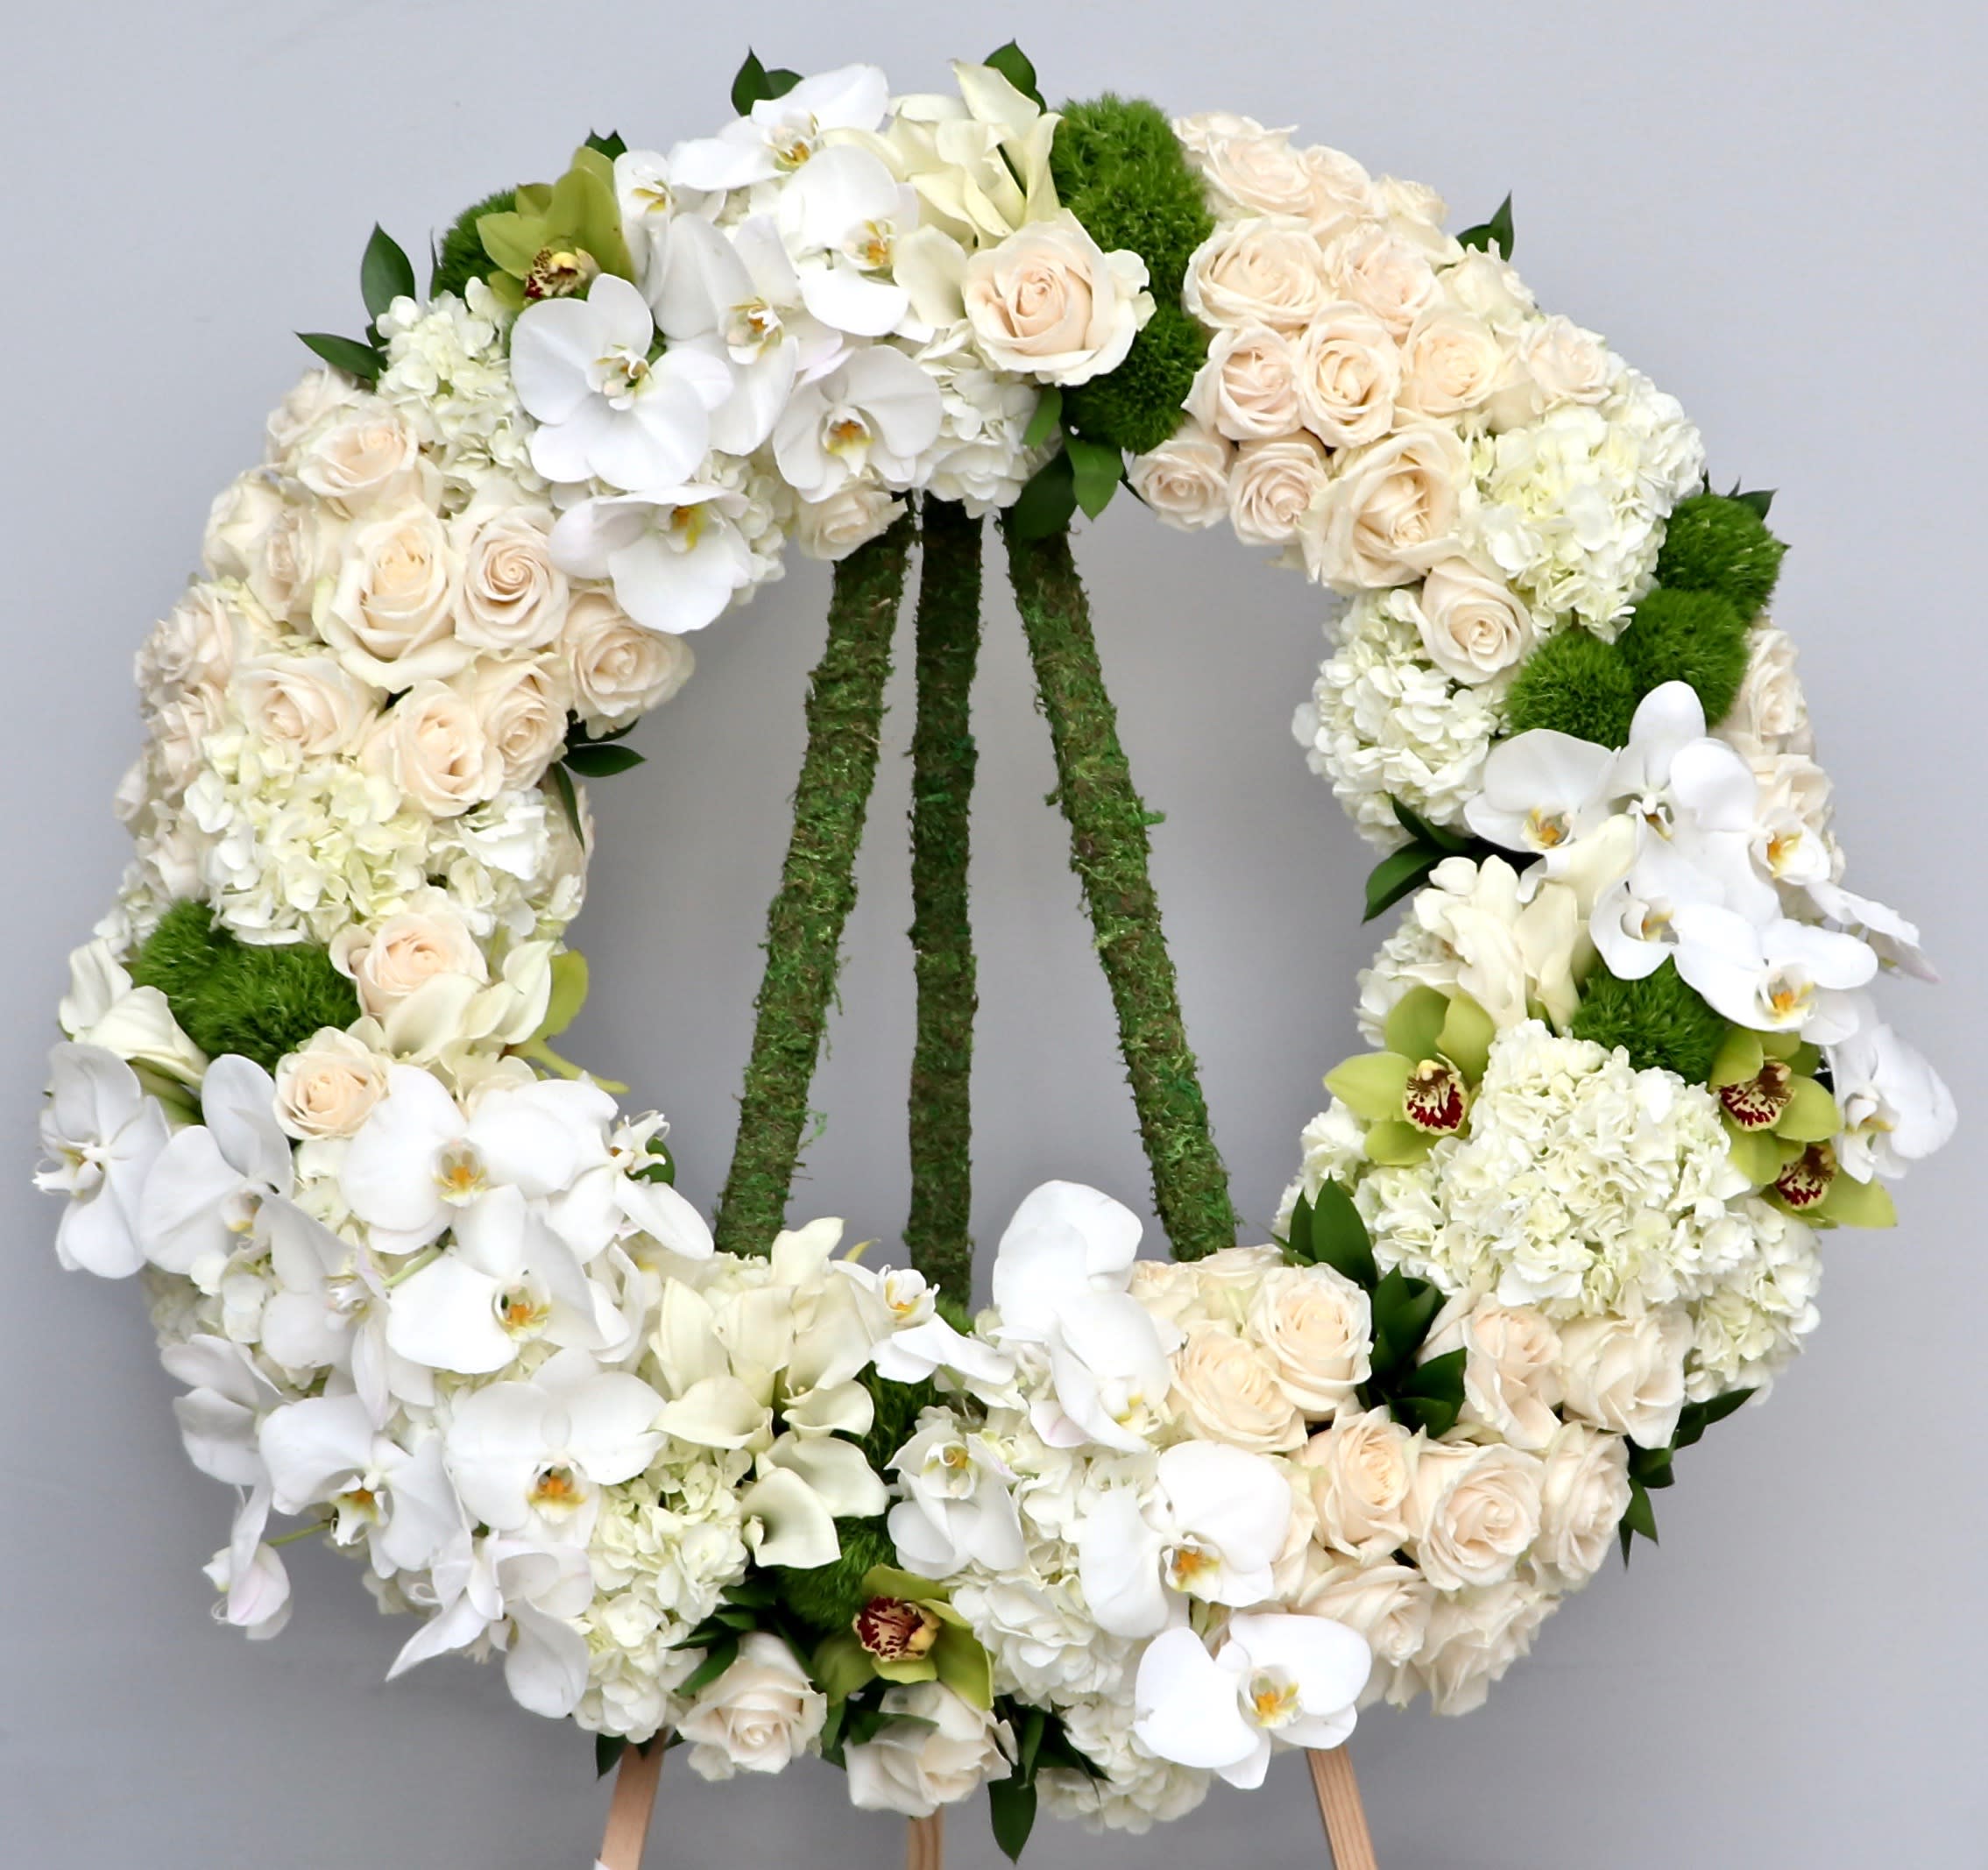 Orchids and Butterflies Wreath  - This wreath contains a mix of white orchids, hydrangeas and seasonal greens.   We include easel, printed banner and delivery (some fees may apply).  Standard size is 30'', deluxe is 36'', and premium is 42''.